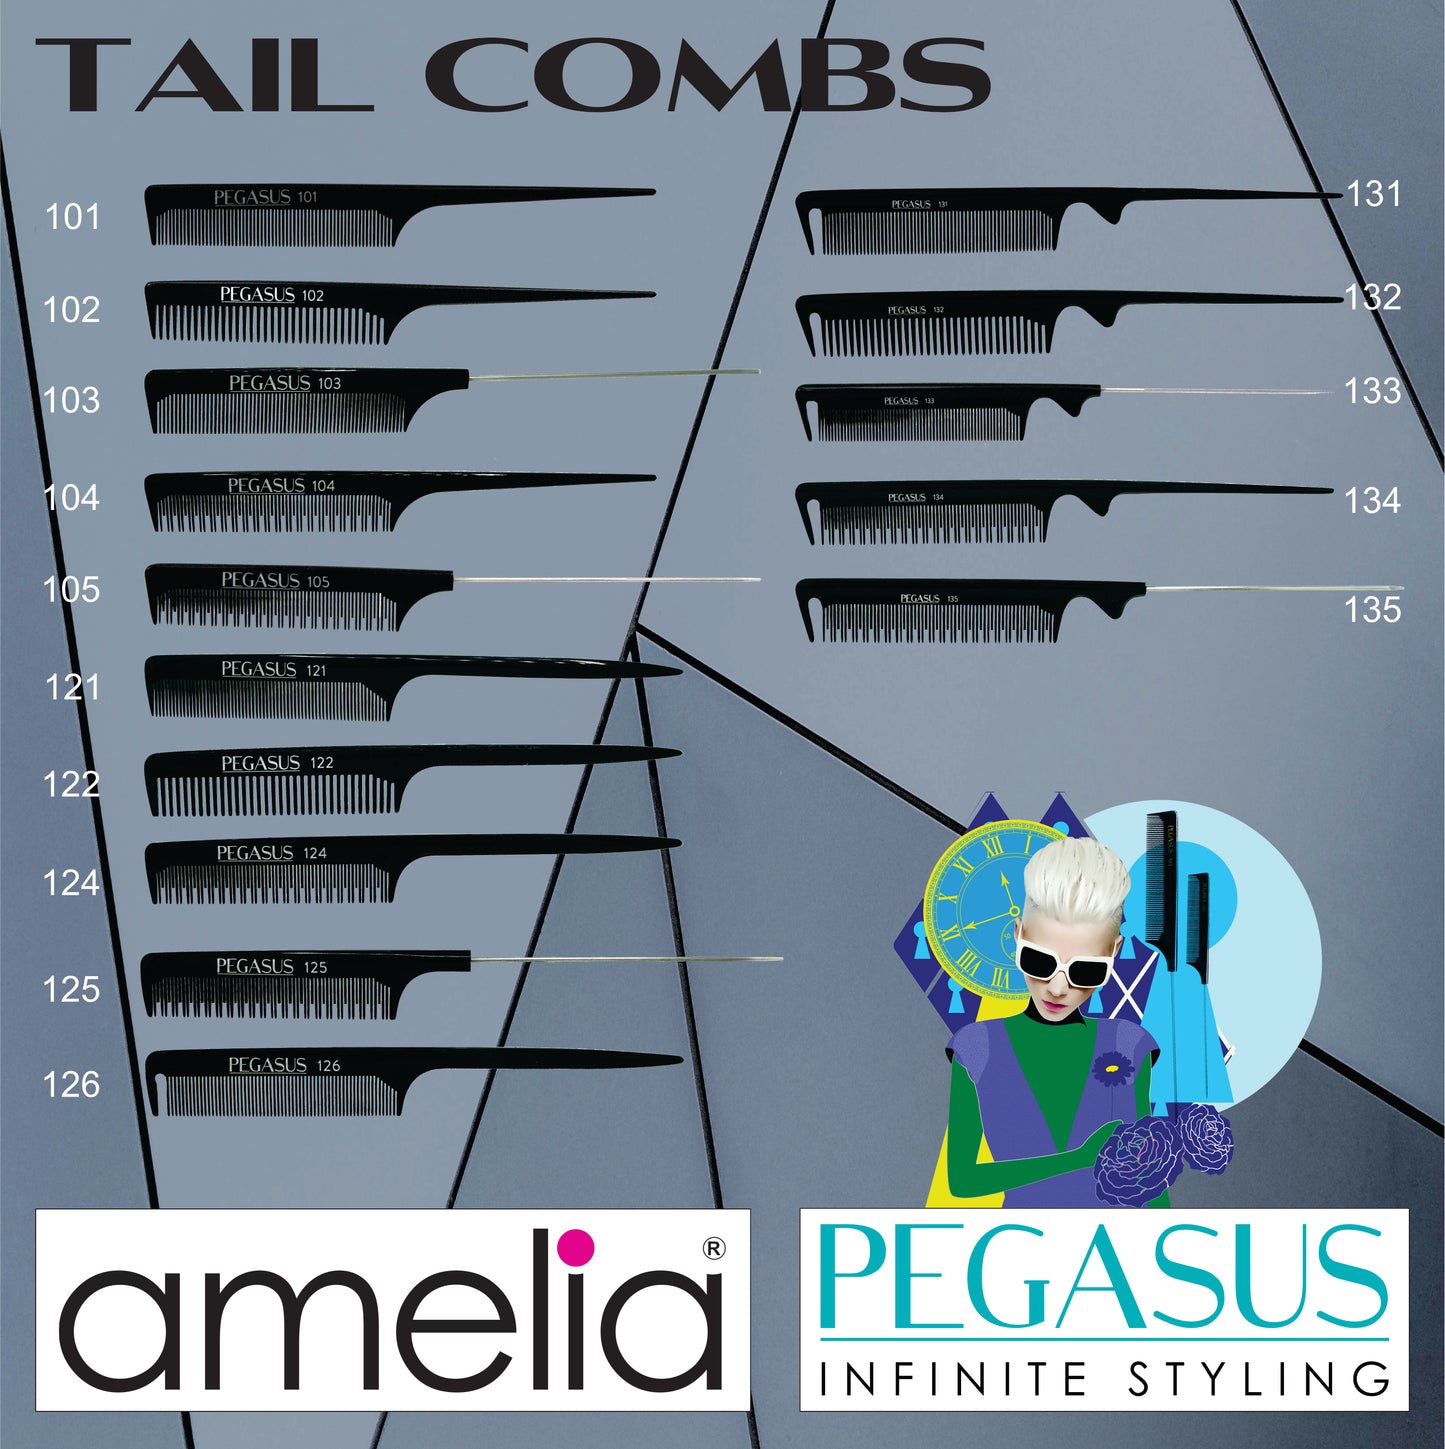 Pegasus 102, 8in Hard Rubber Course Tooth Rat Tail Comb, Handmade, Seamless, Smooth Edges, Anti Static, Heat and Chemically Resistant, Great for Parting, Coloring Hair | Peines de goma dura - Black